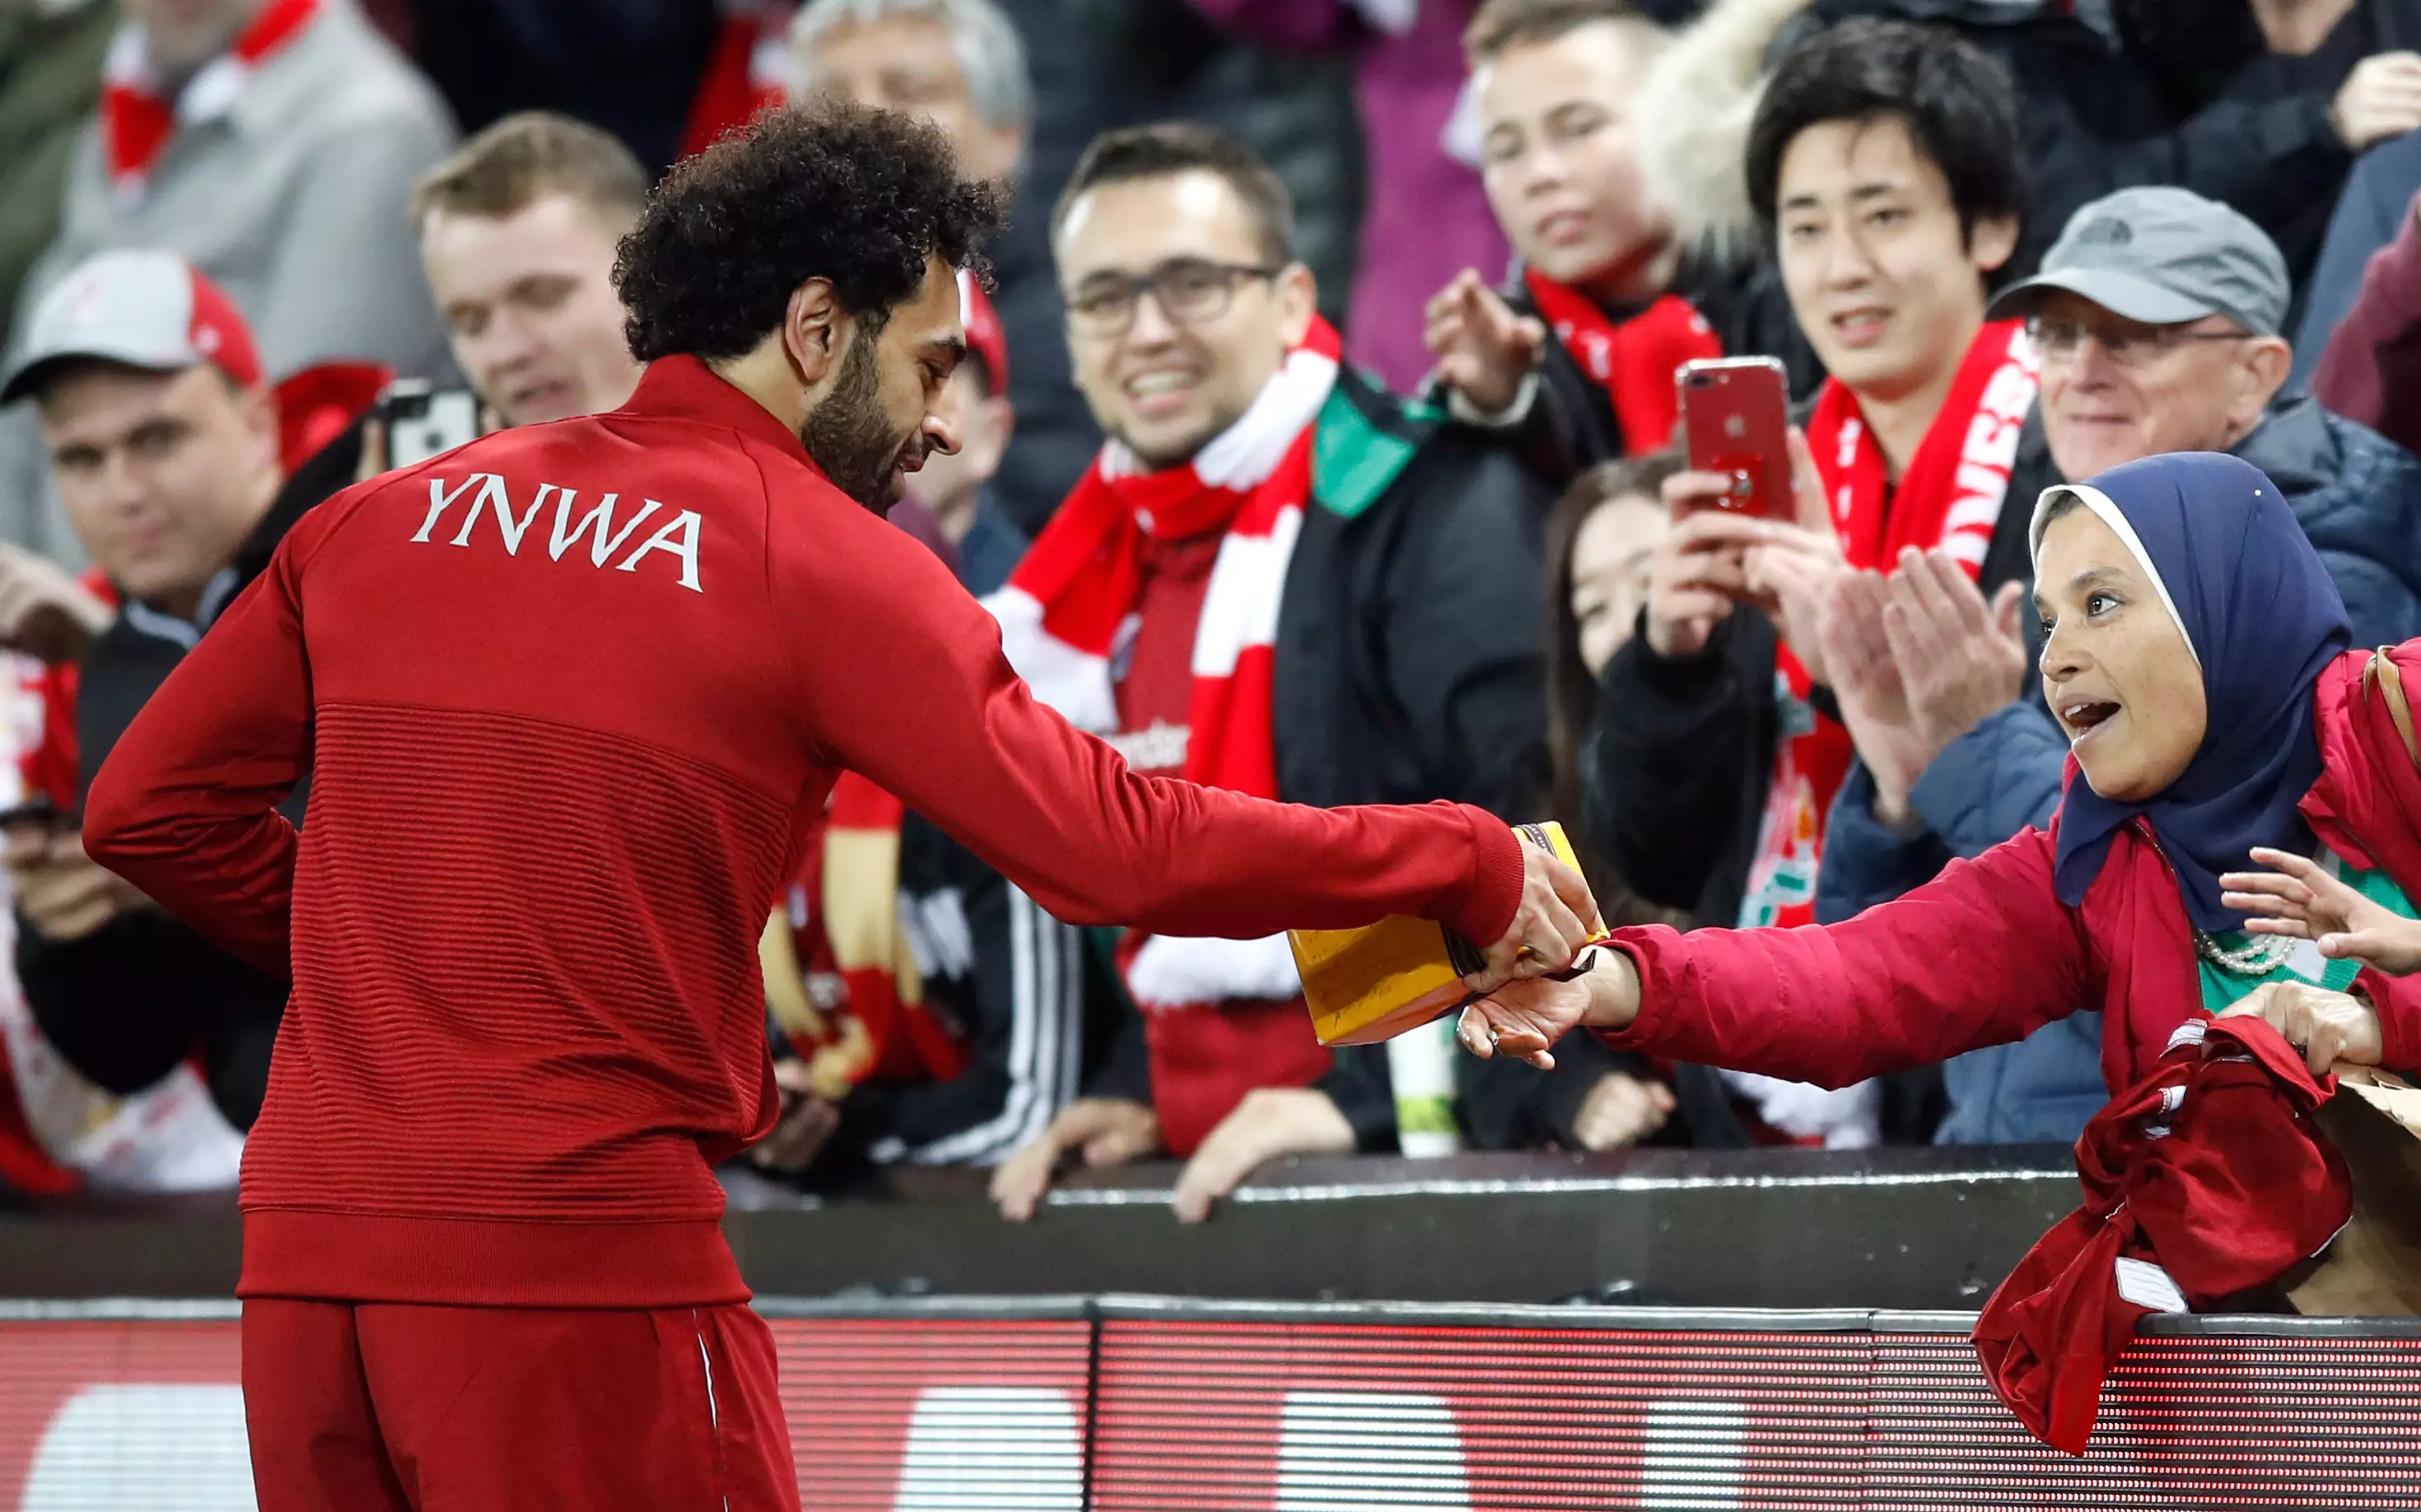 Salah takes the chocolates after handing over his shirt. Image: PA Images